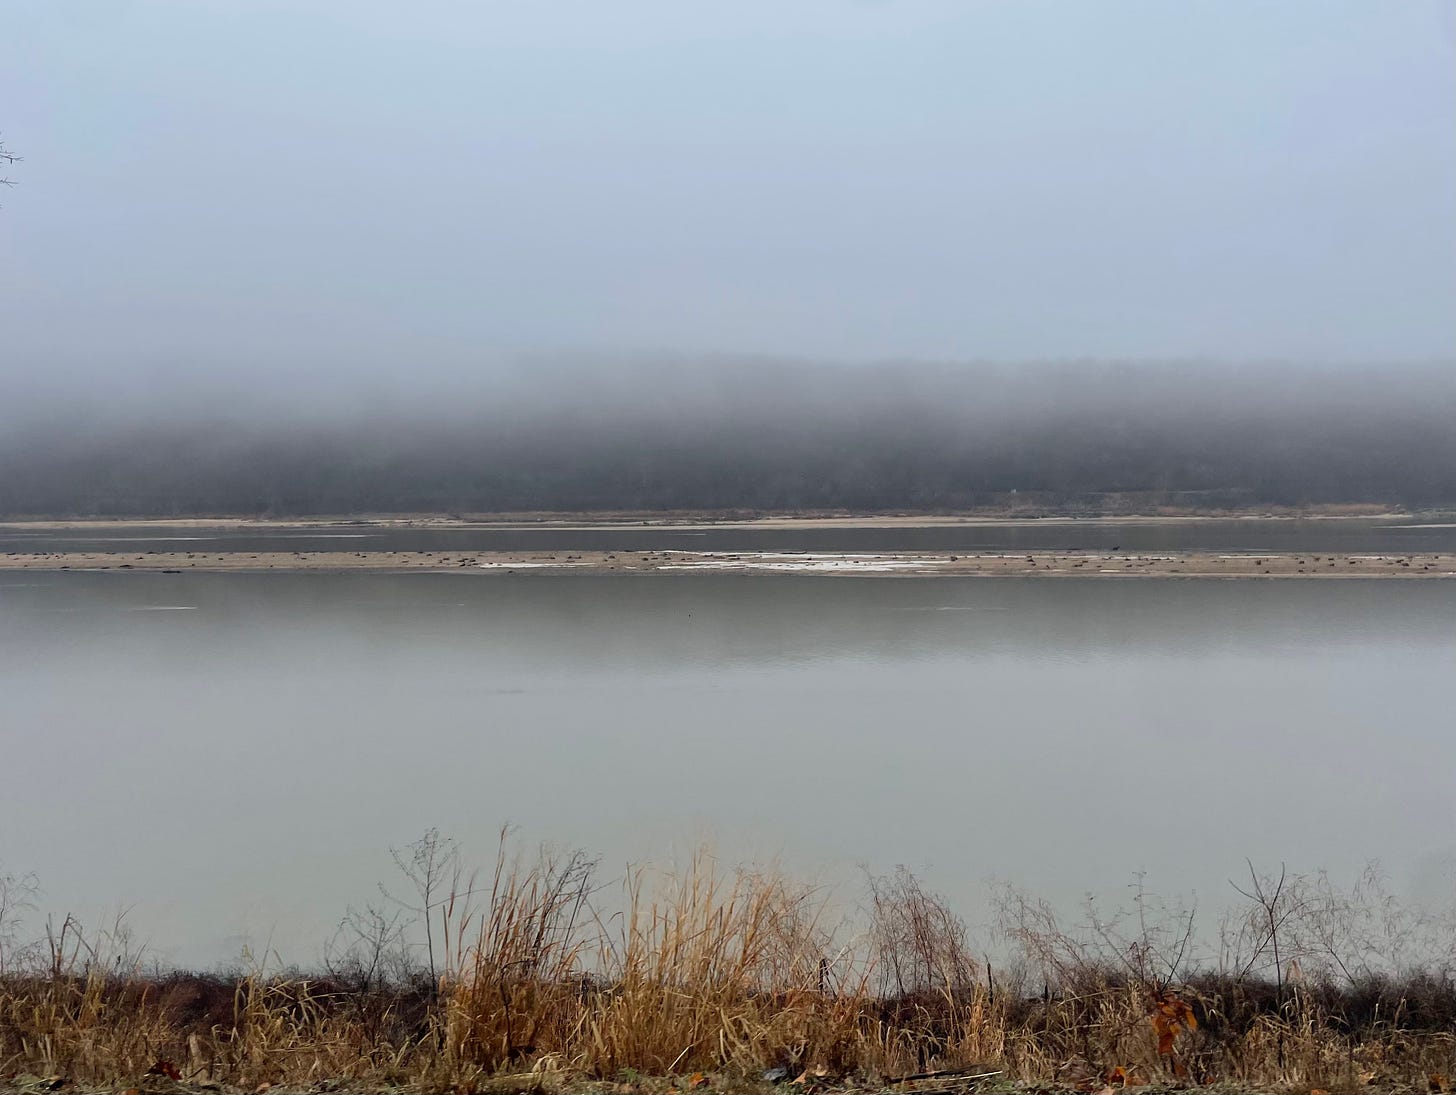 Heavy fog hangs over the smooth, silvery grey surface of the Arkansas River, shrouding the forested shoreline on the snow-dusted bank in the distance. A strip of wintering golden grasses is visible on the near shore at the bottom of the image. Remnants of snow linger on a mid-channel sandbar.